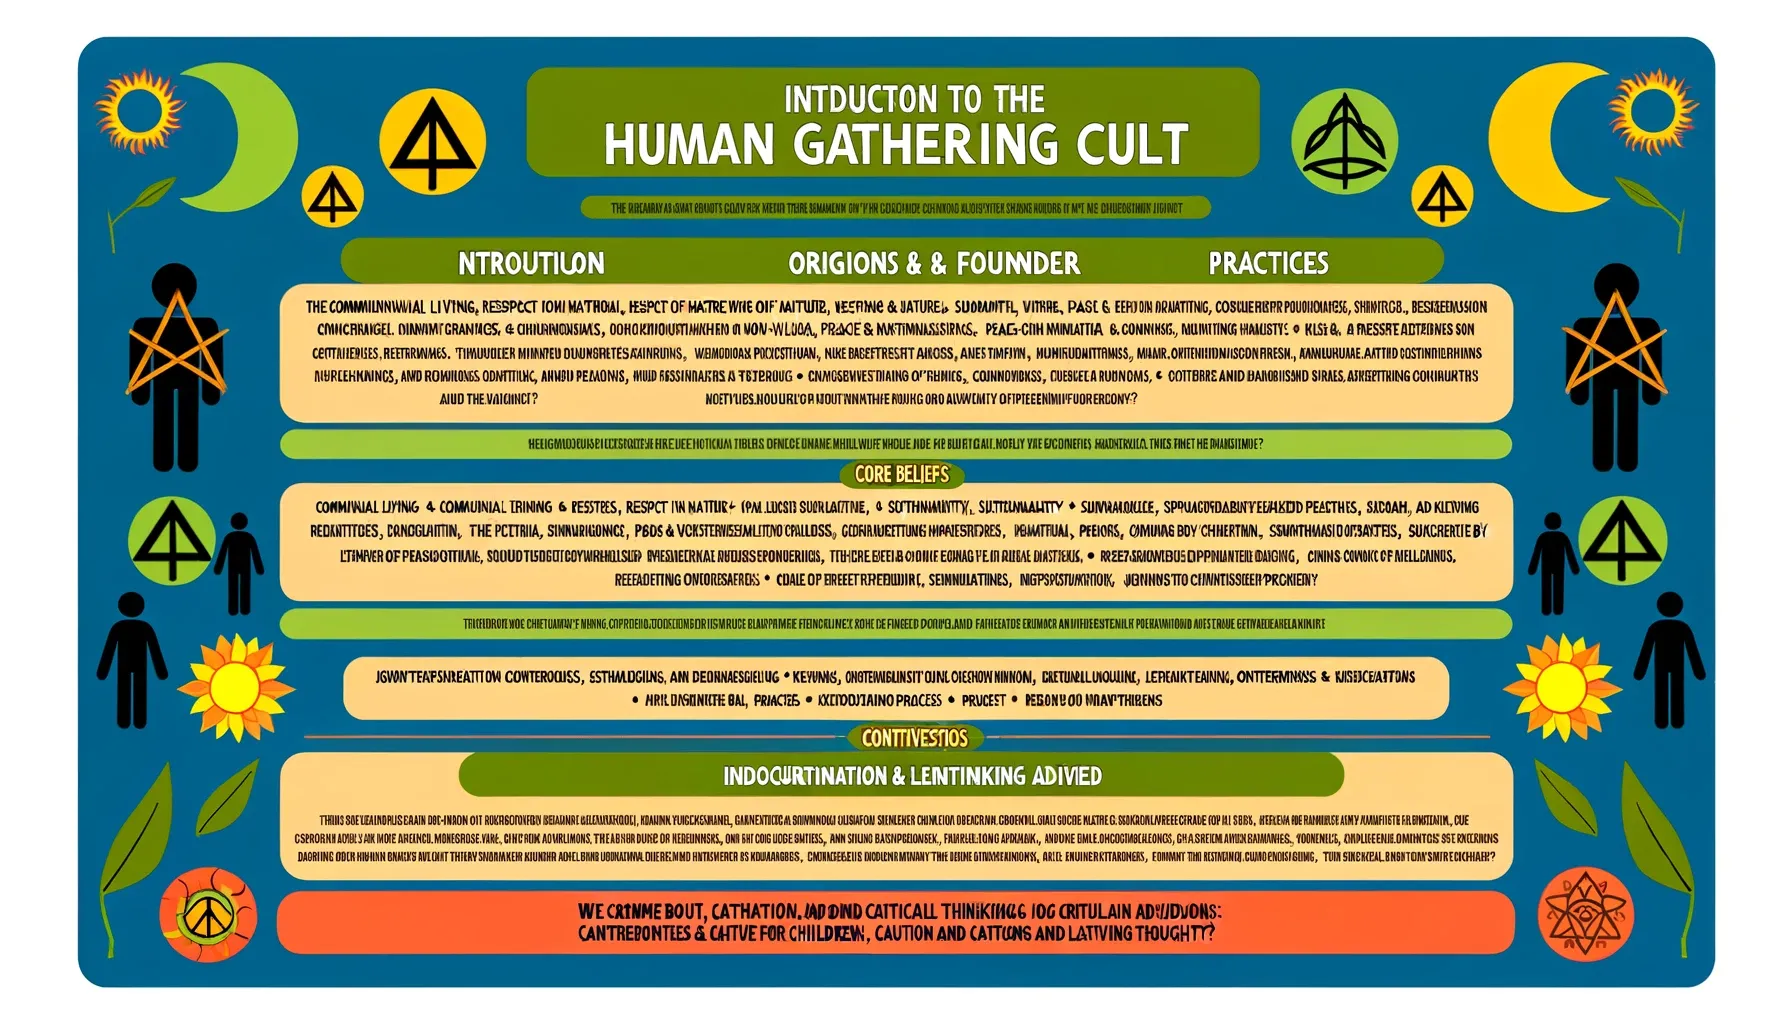 The Human Gathering Cult: Comprehensive Overview